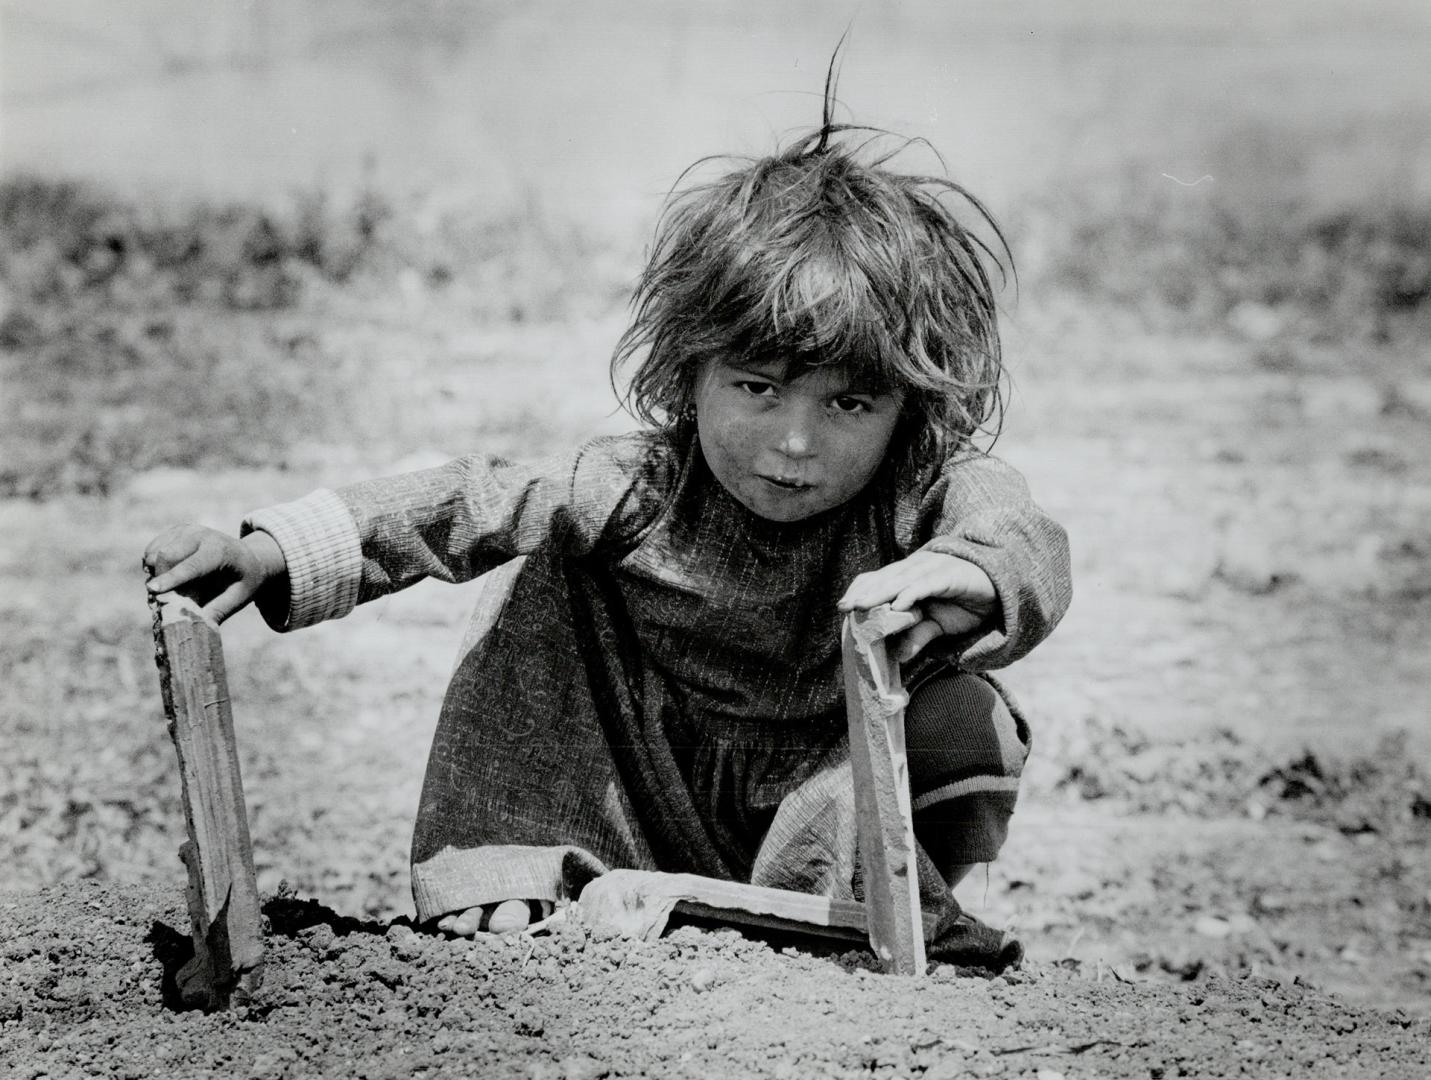 Hard struggle: Clockwise from top, a child uses war debris as toys,